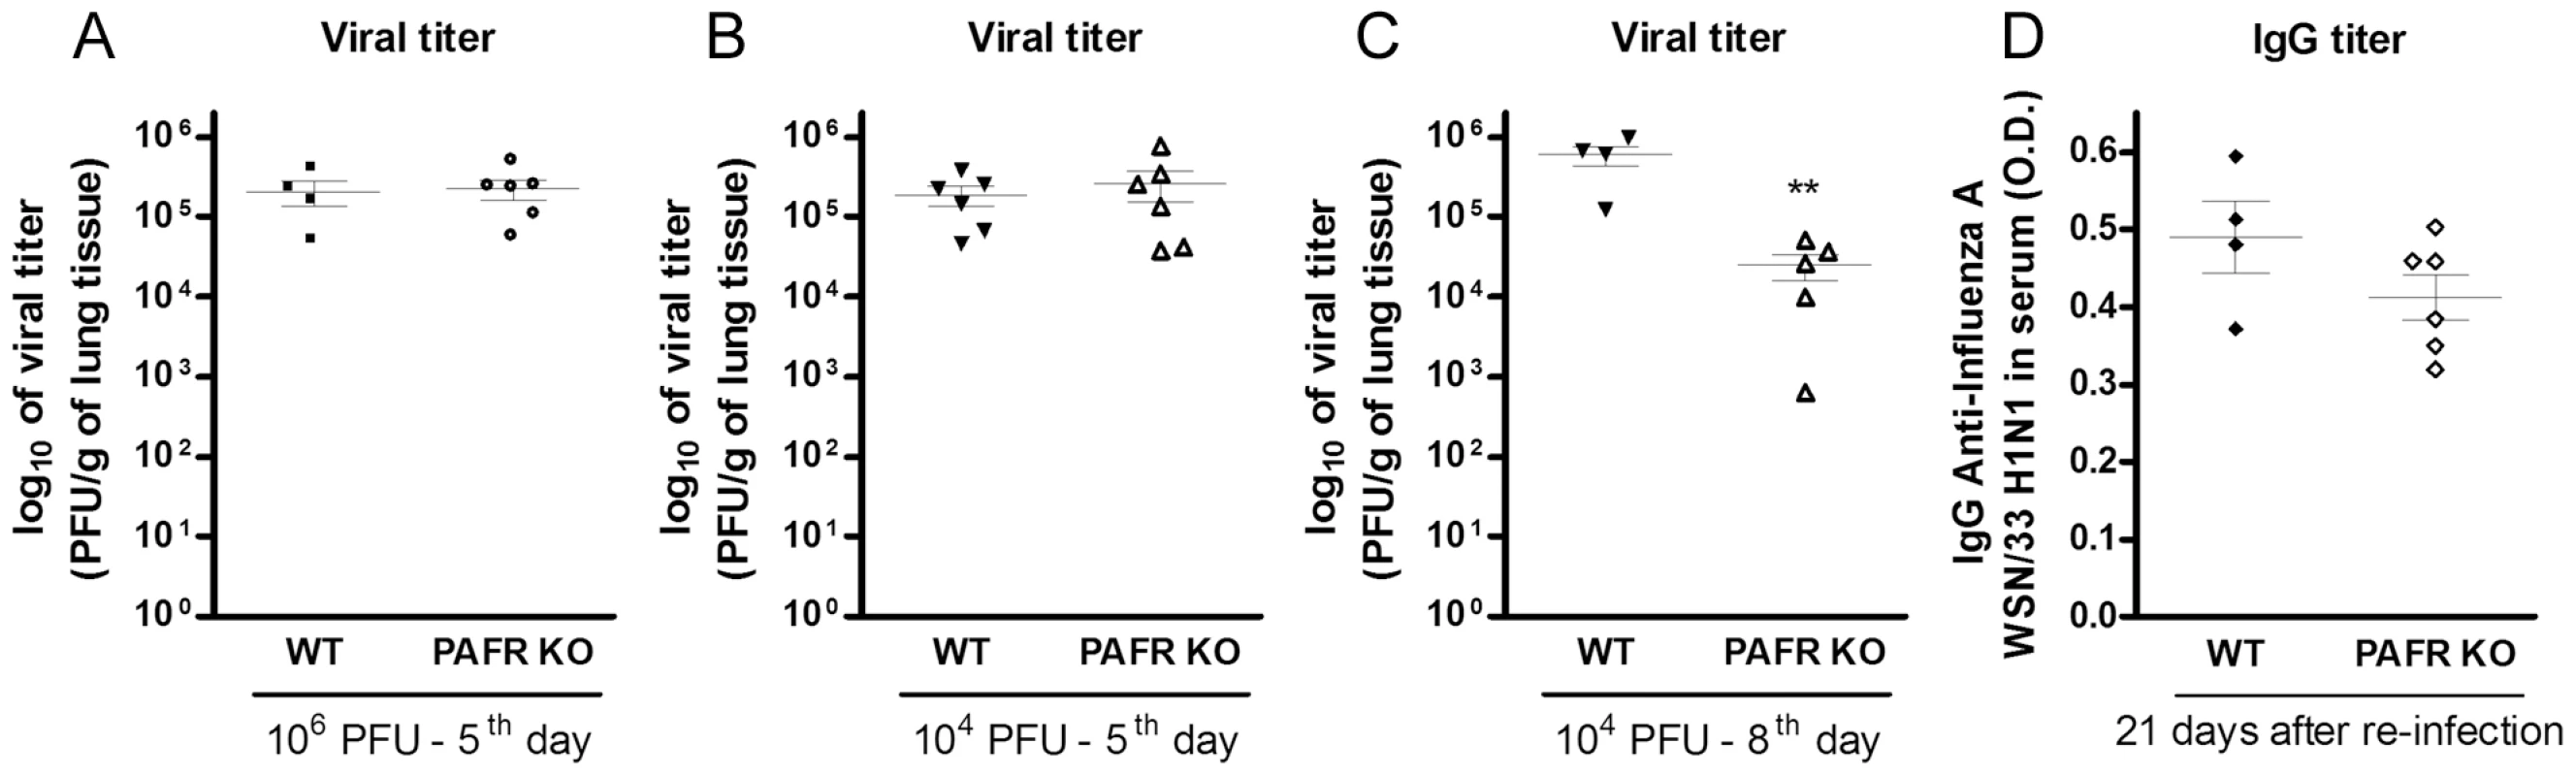 Viral load and specific antibodies after Influenza A/WSN/33 H1N1 infections of WT and PAFR-deficient mice.